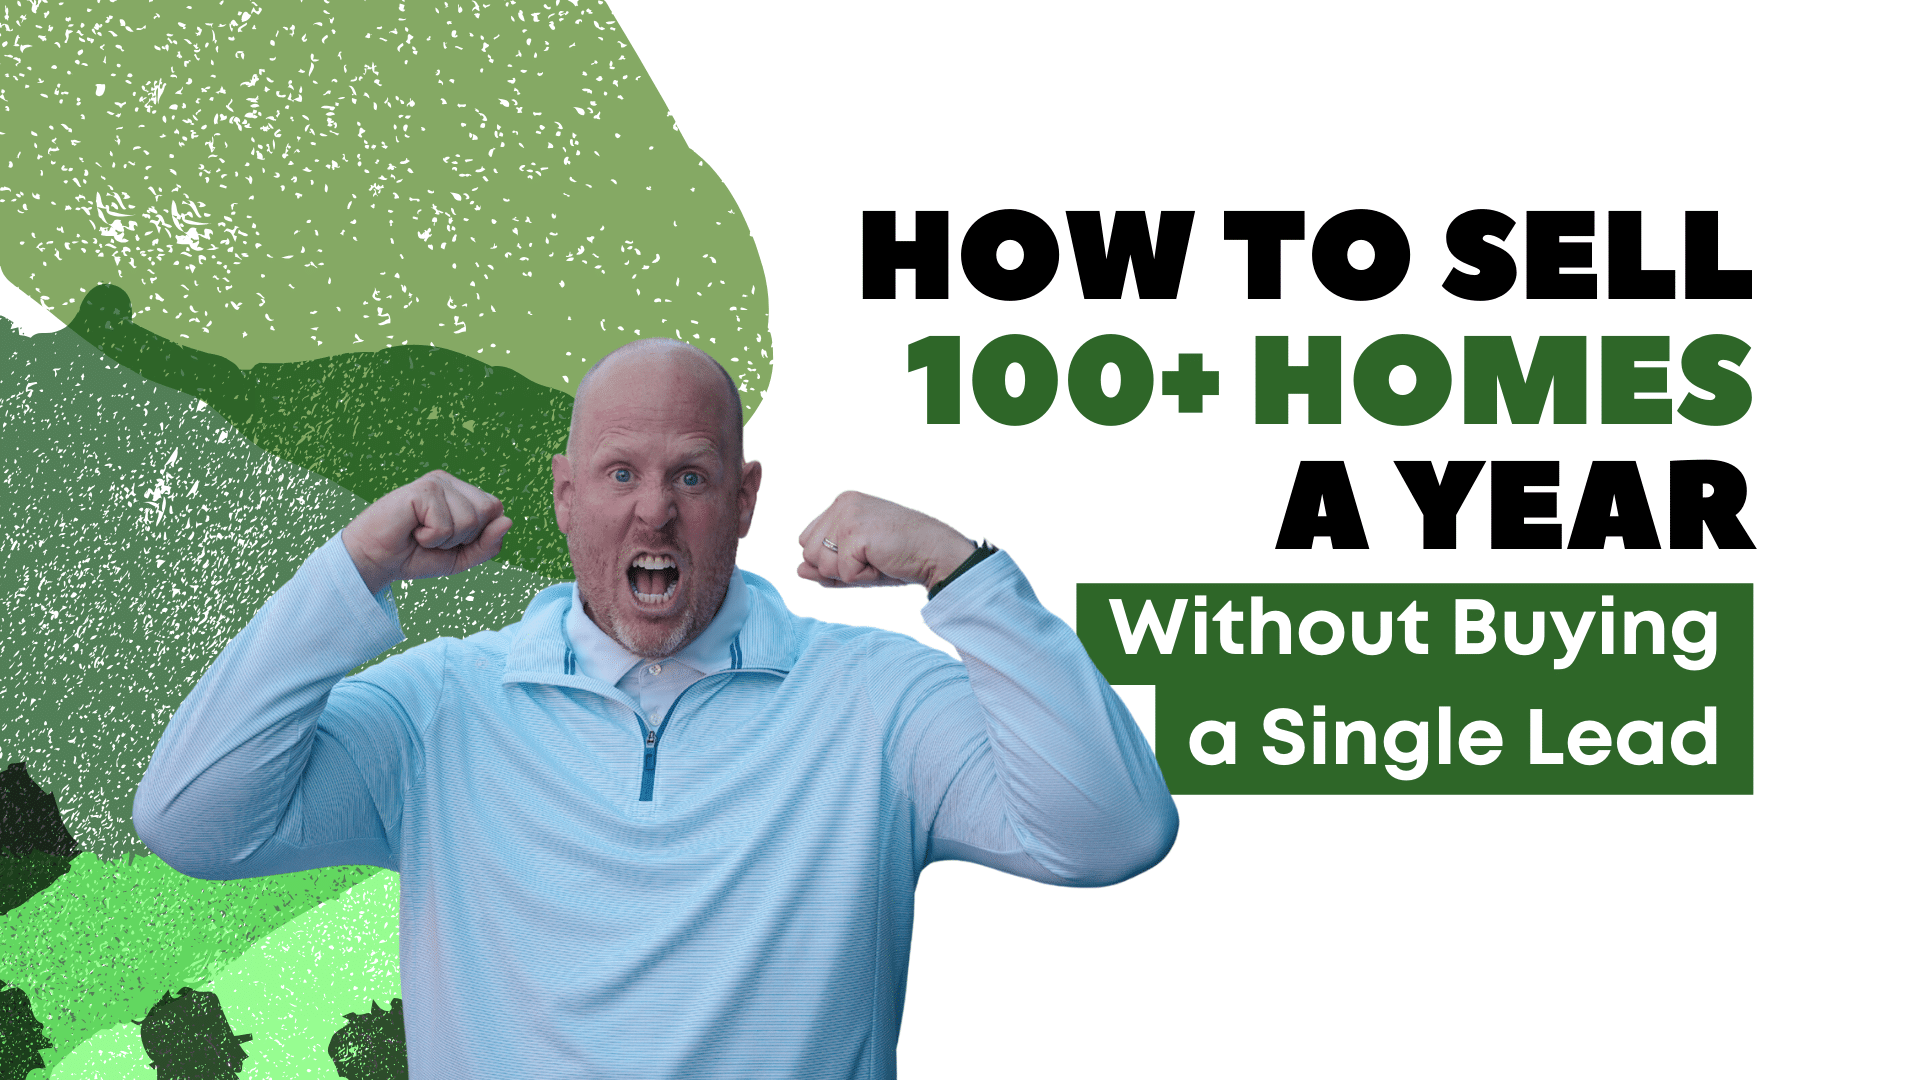 How to Sell 100+ Homes a Year Without Buying a Single Lead